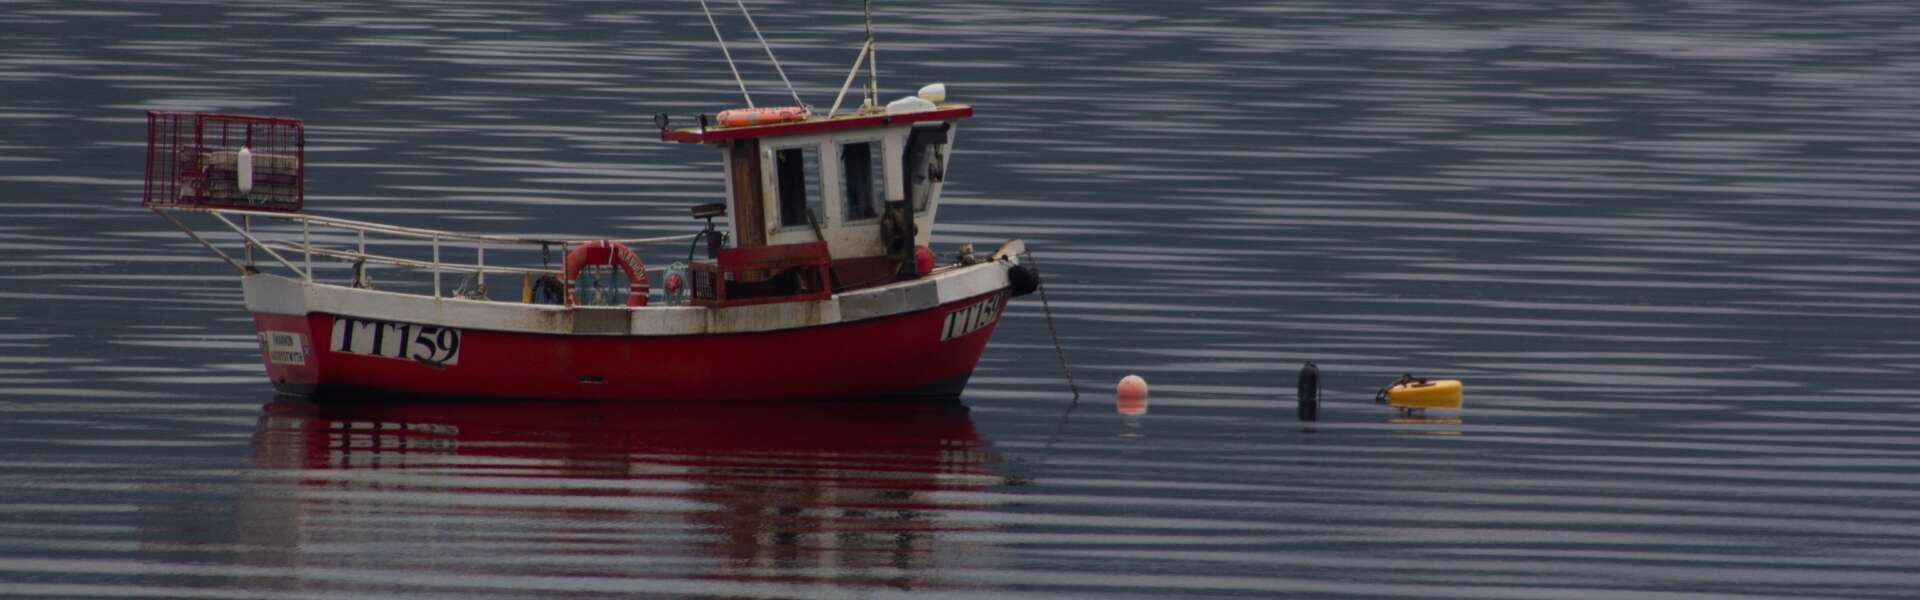 A small red and white fishing boat with fishing gear laid out in front of it sits in a body of water